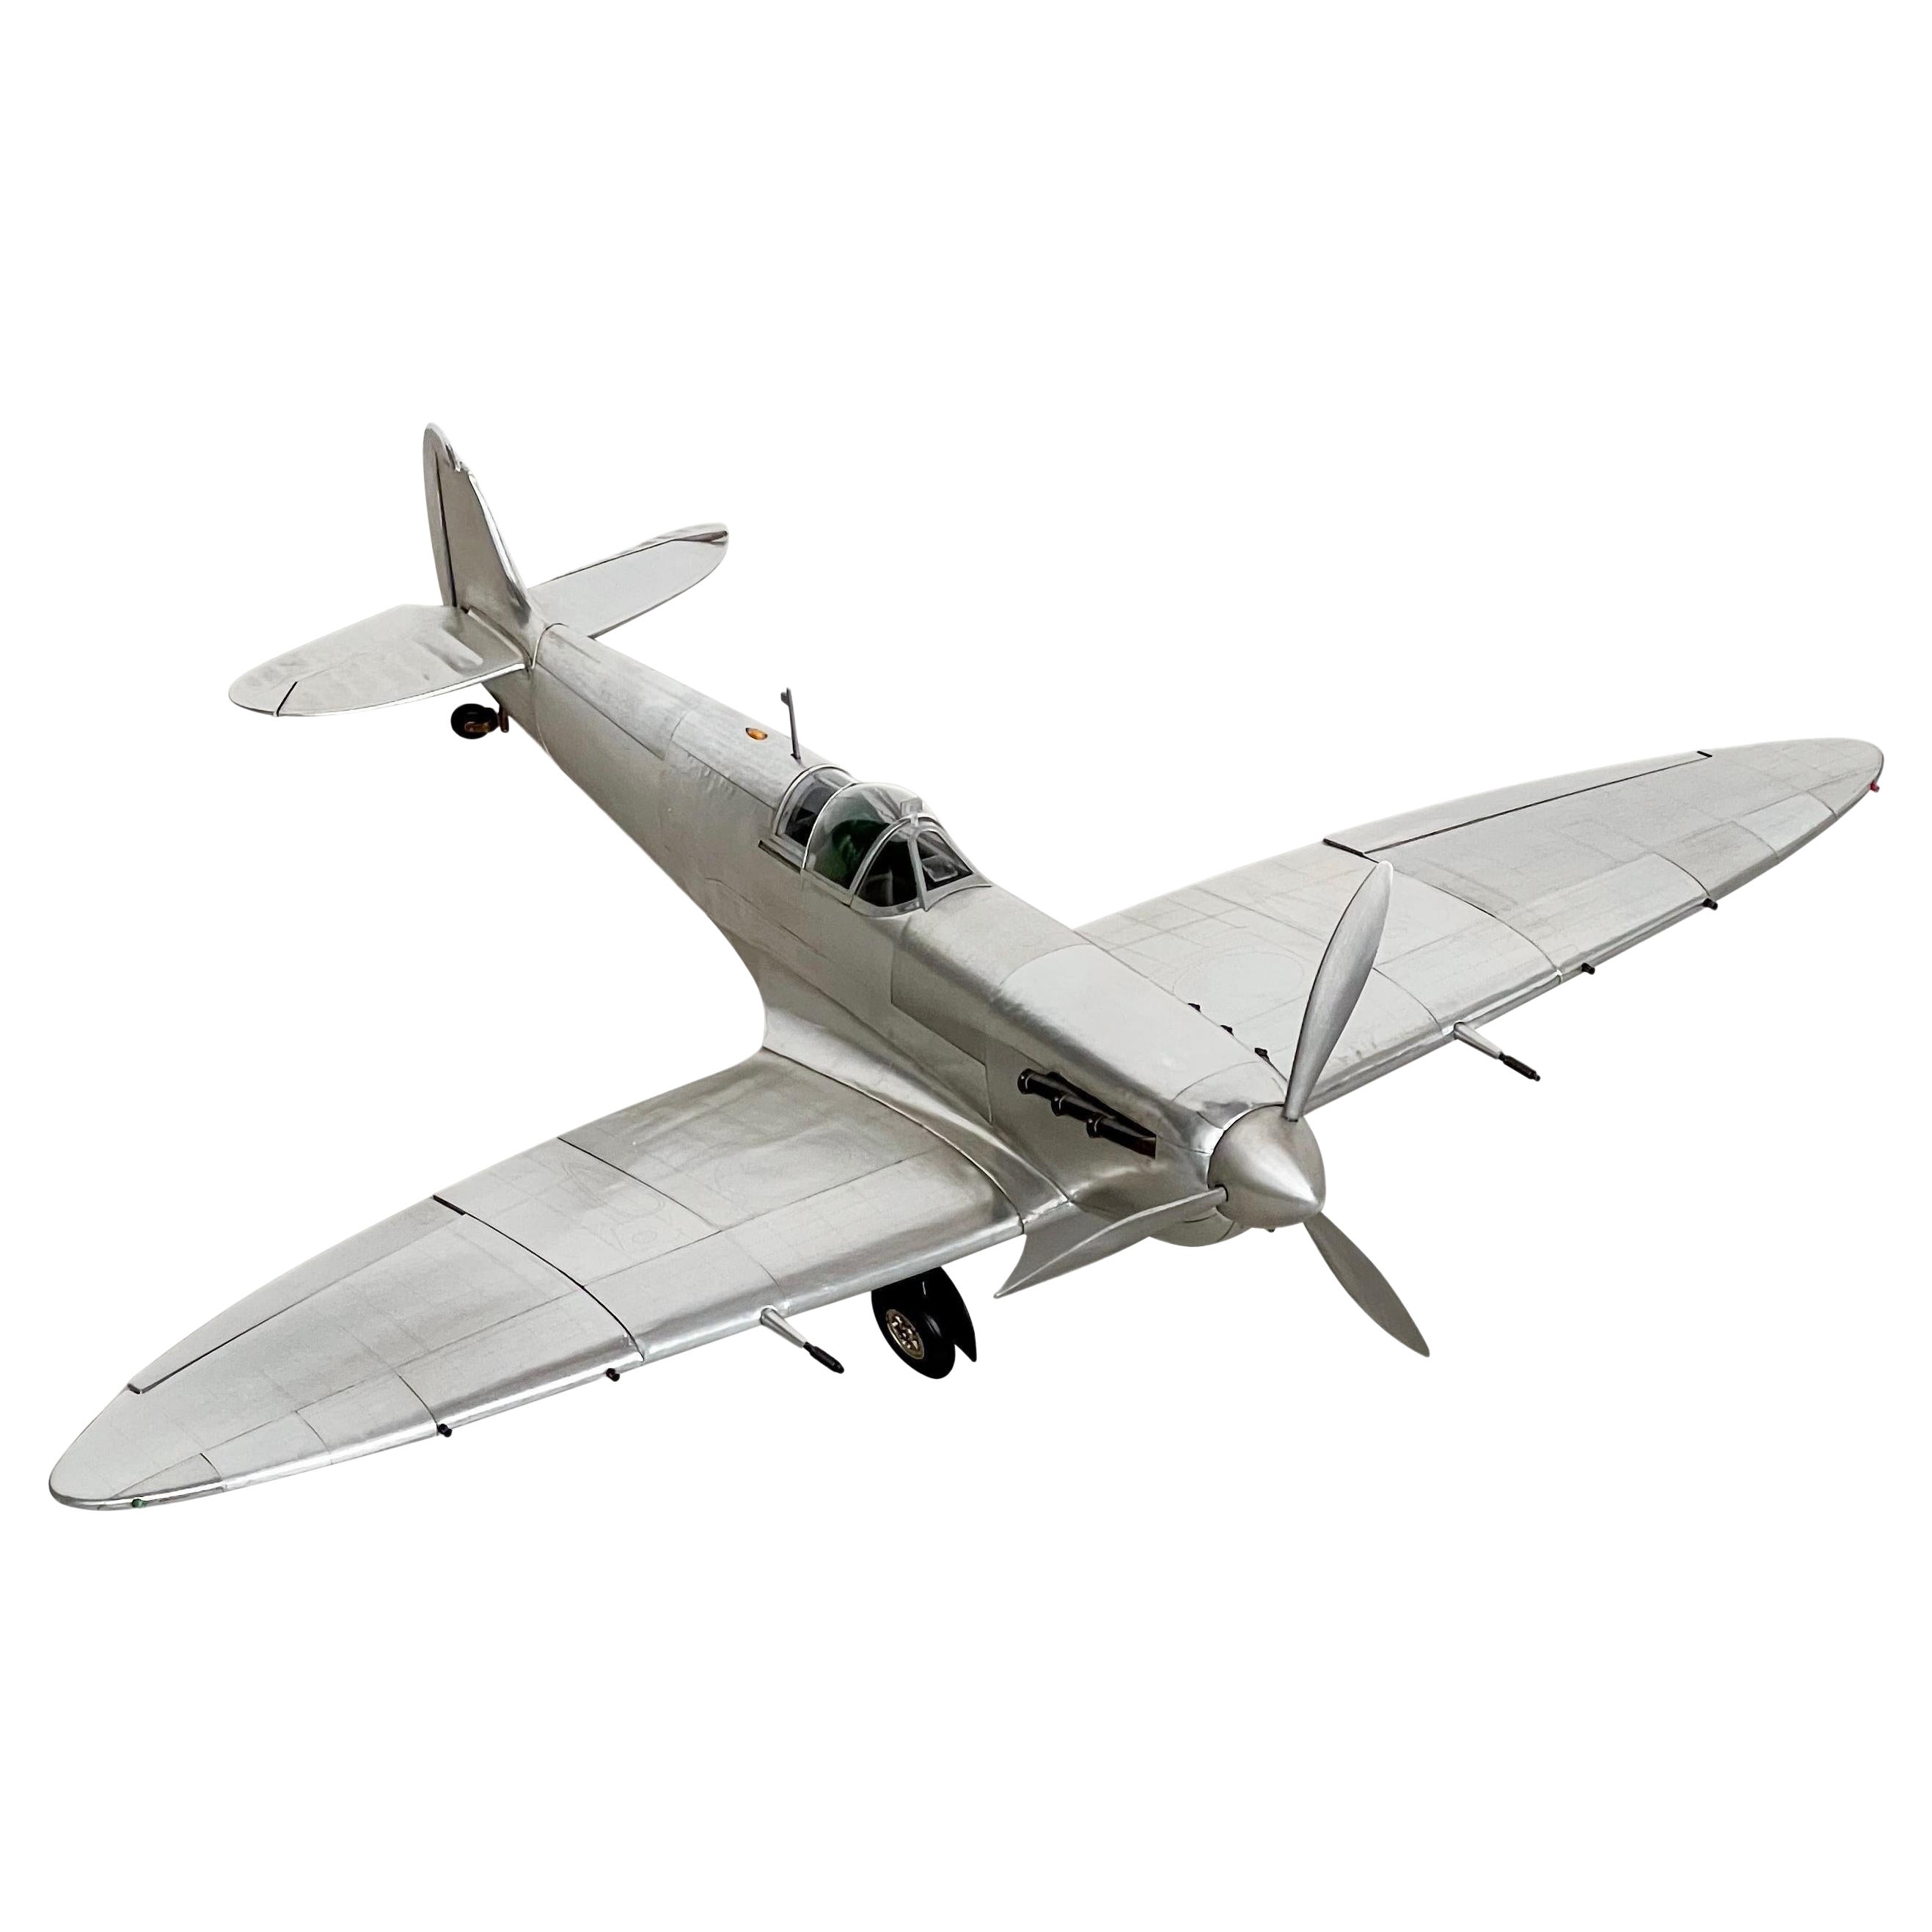 Supermarine Spitfire Airplane Decorative Scale Model, Big Size, Highly Detailed For Sale